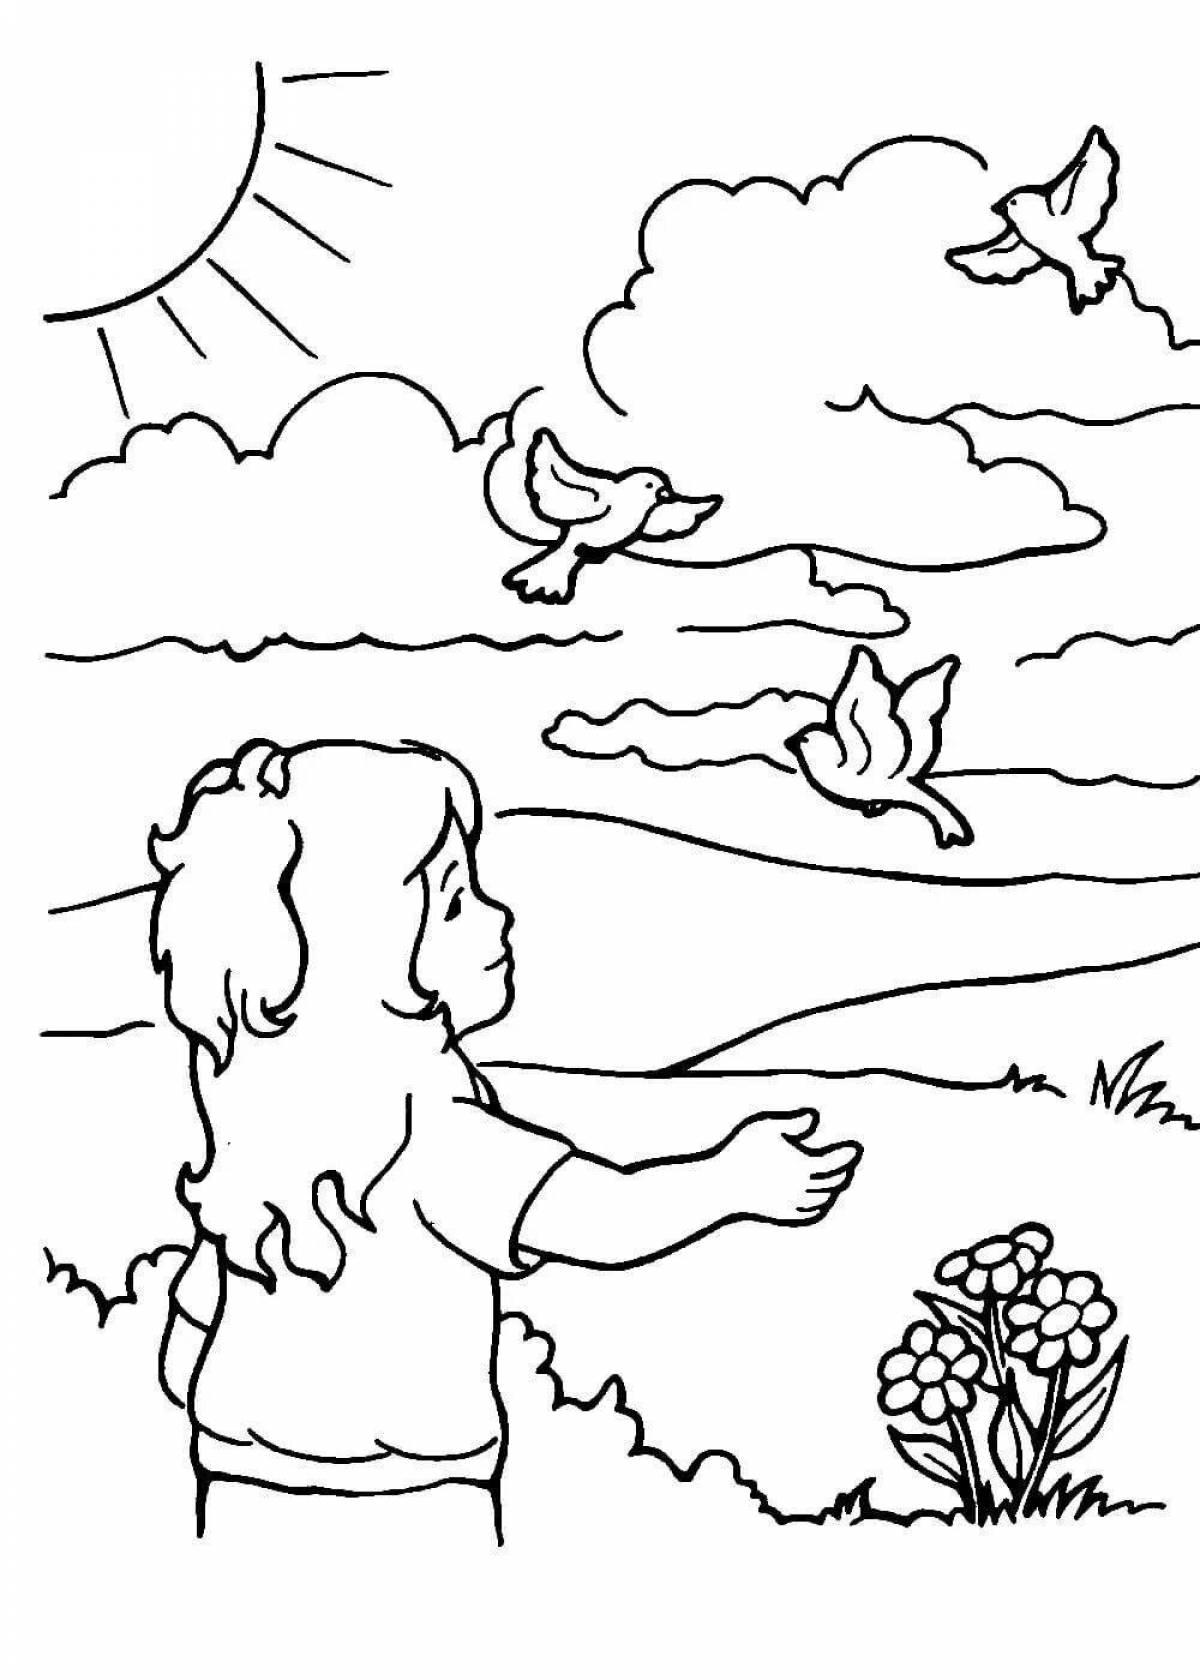 Coloring book cheerful man and nature